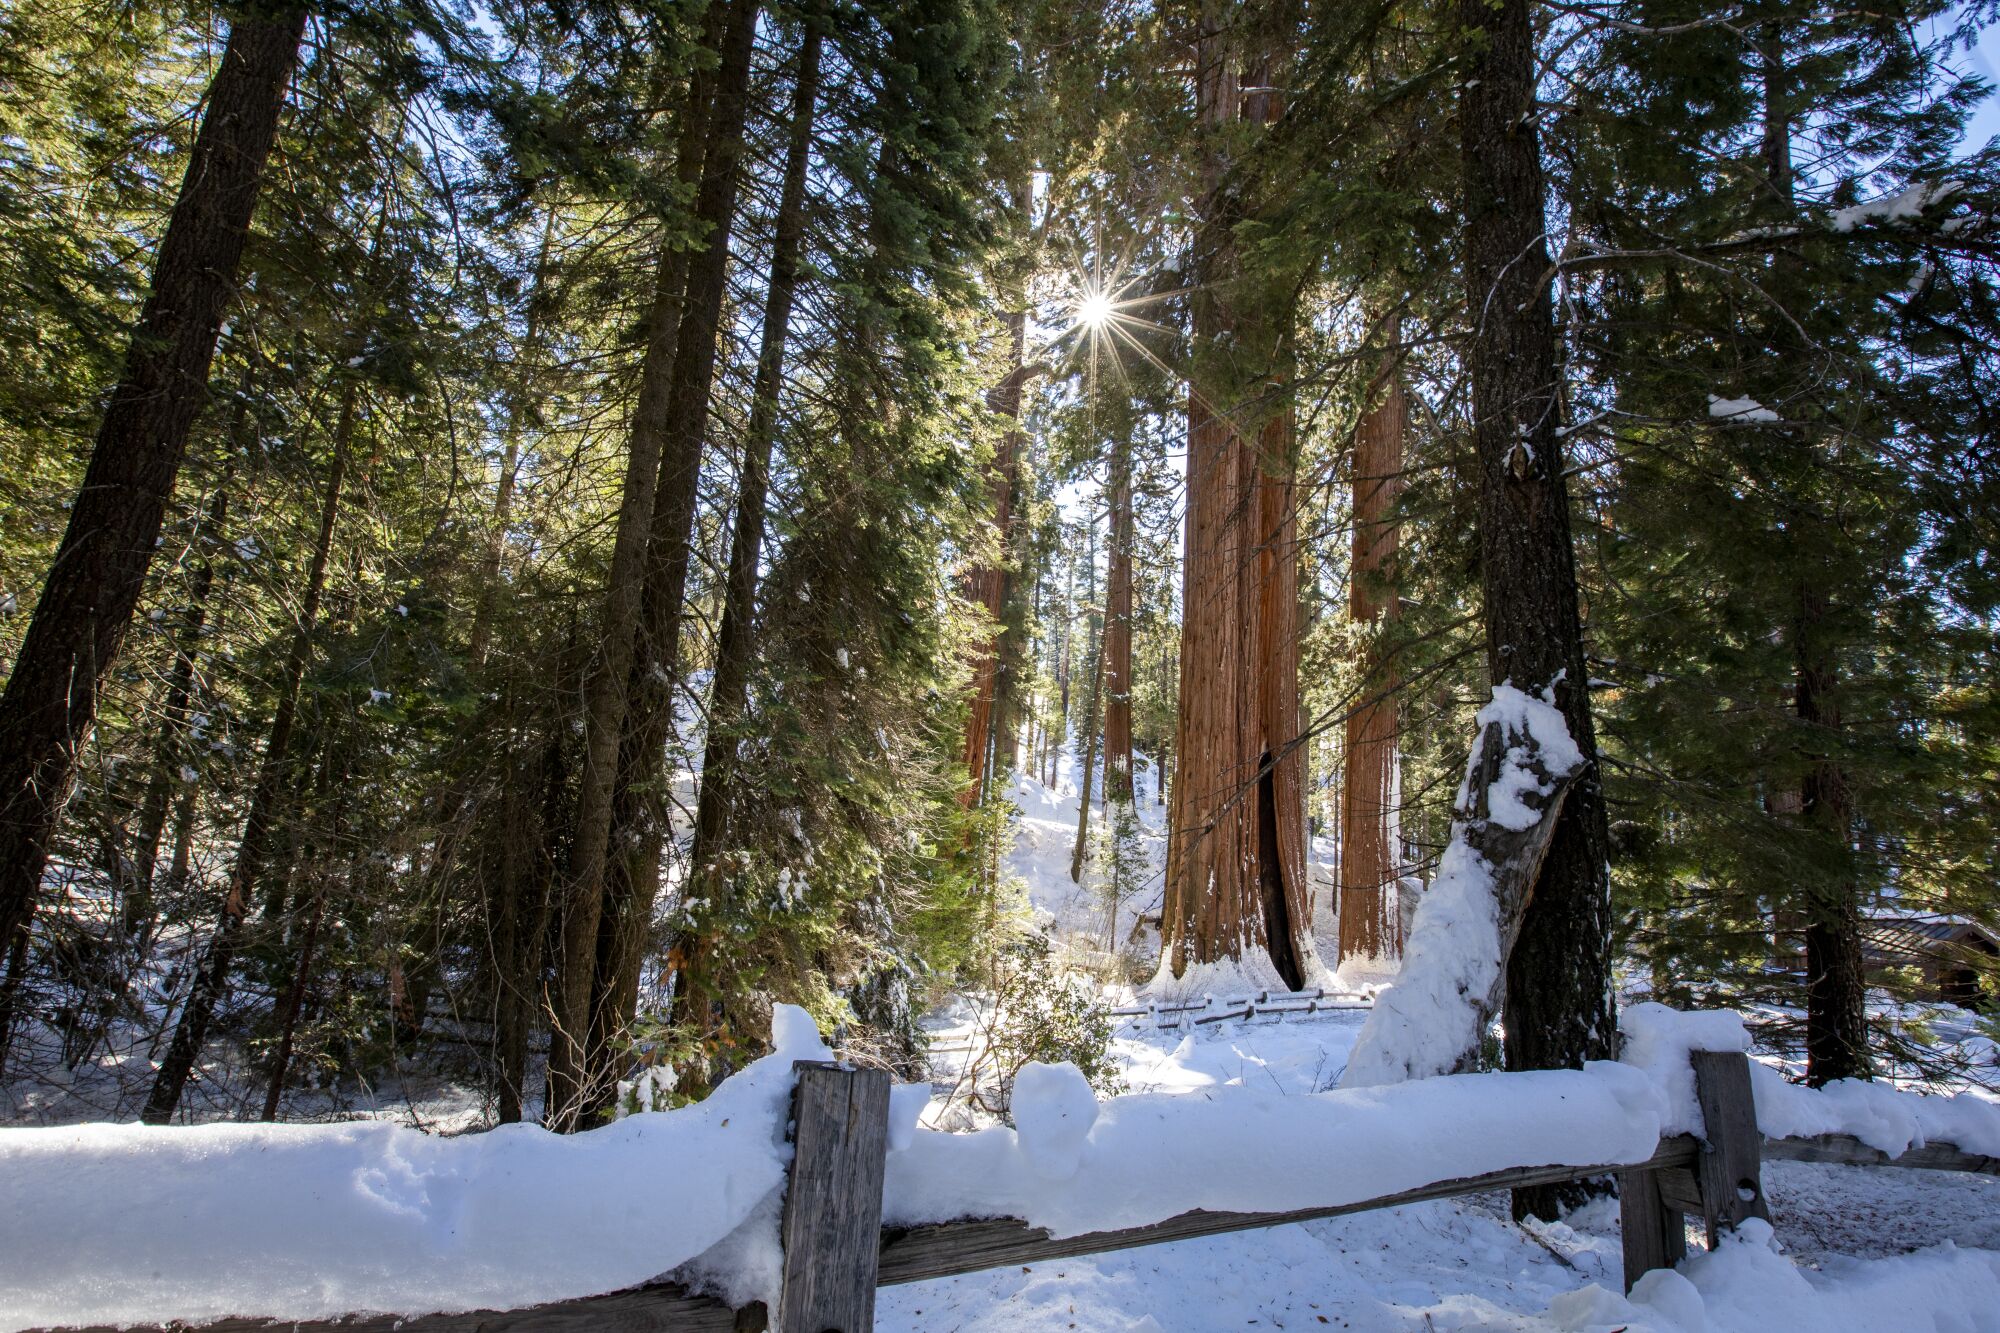 Rays of sunlight shine through a grove of majestic sequoia trees on snow-covered ground.